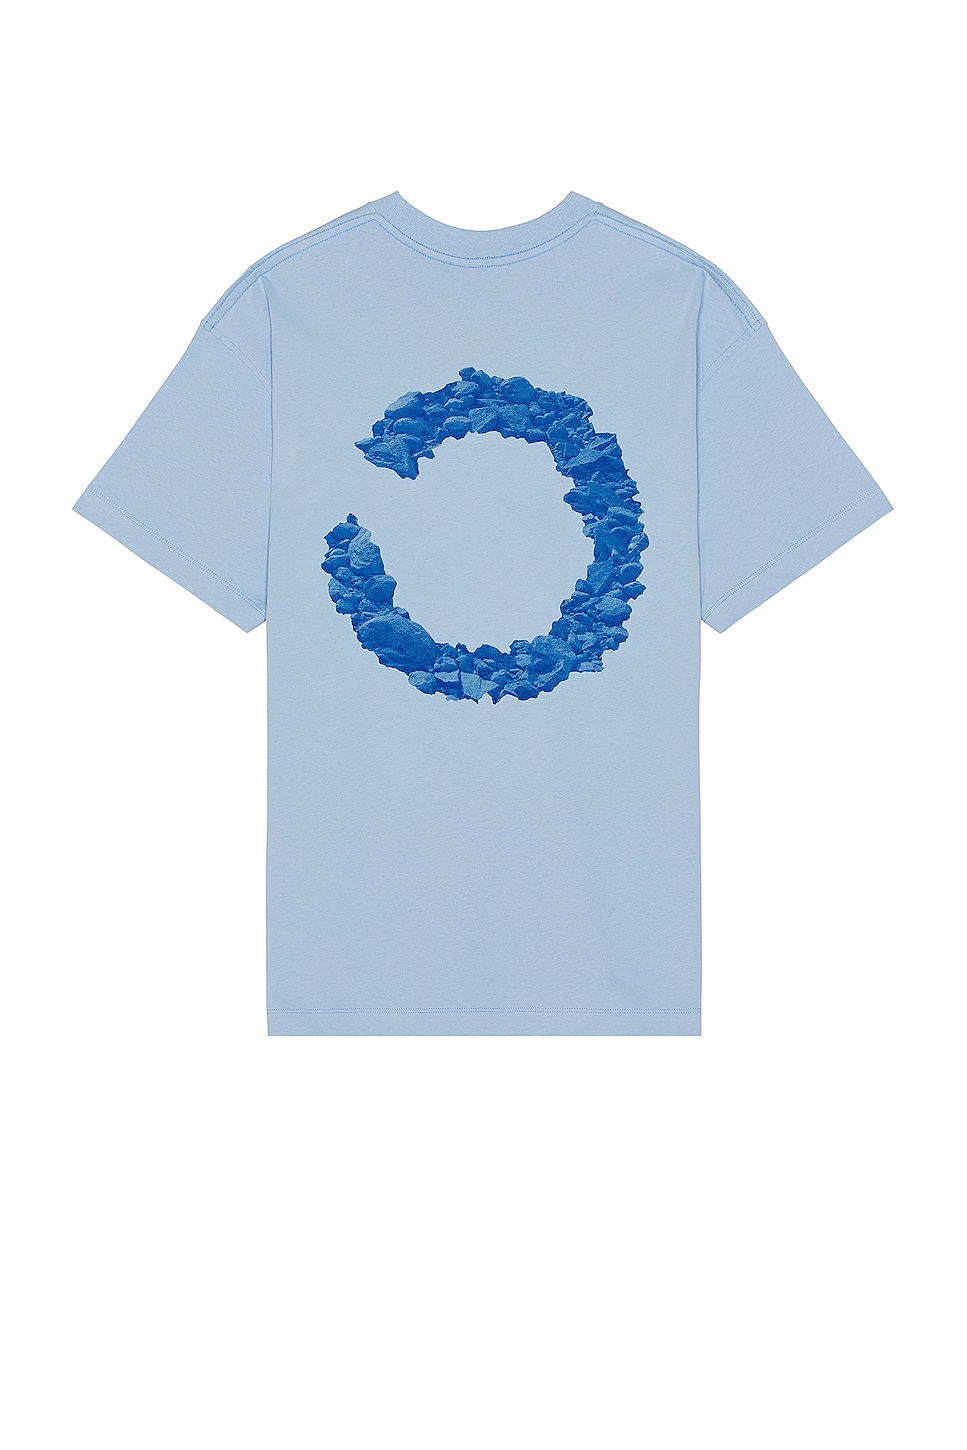 Image 1 of Objects IV Life Boulder Print T-shirt in Pop Blue